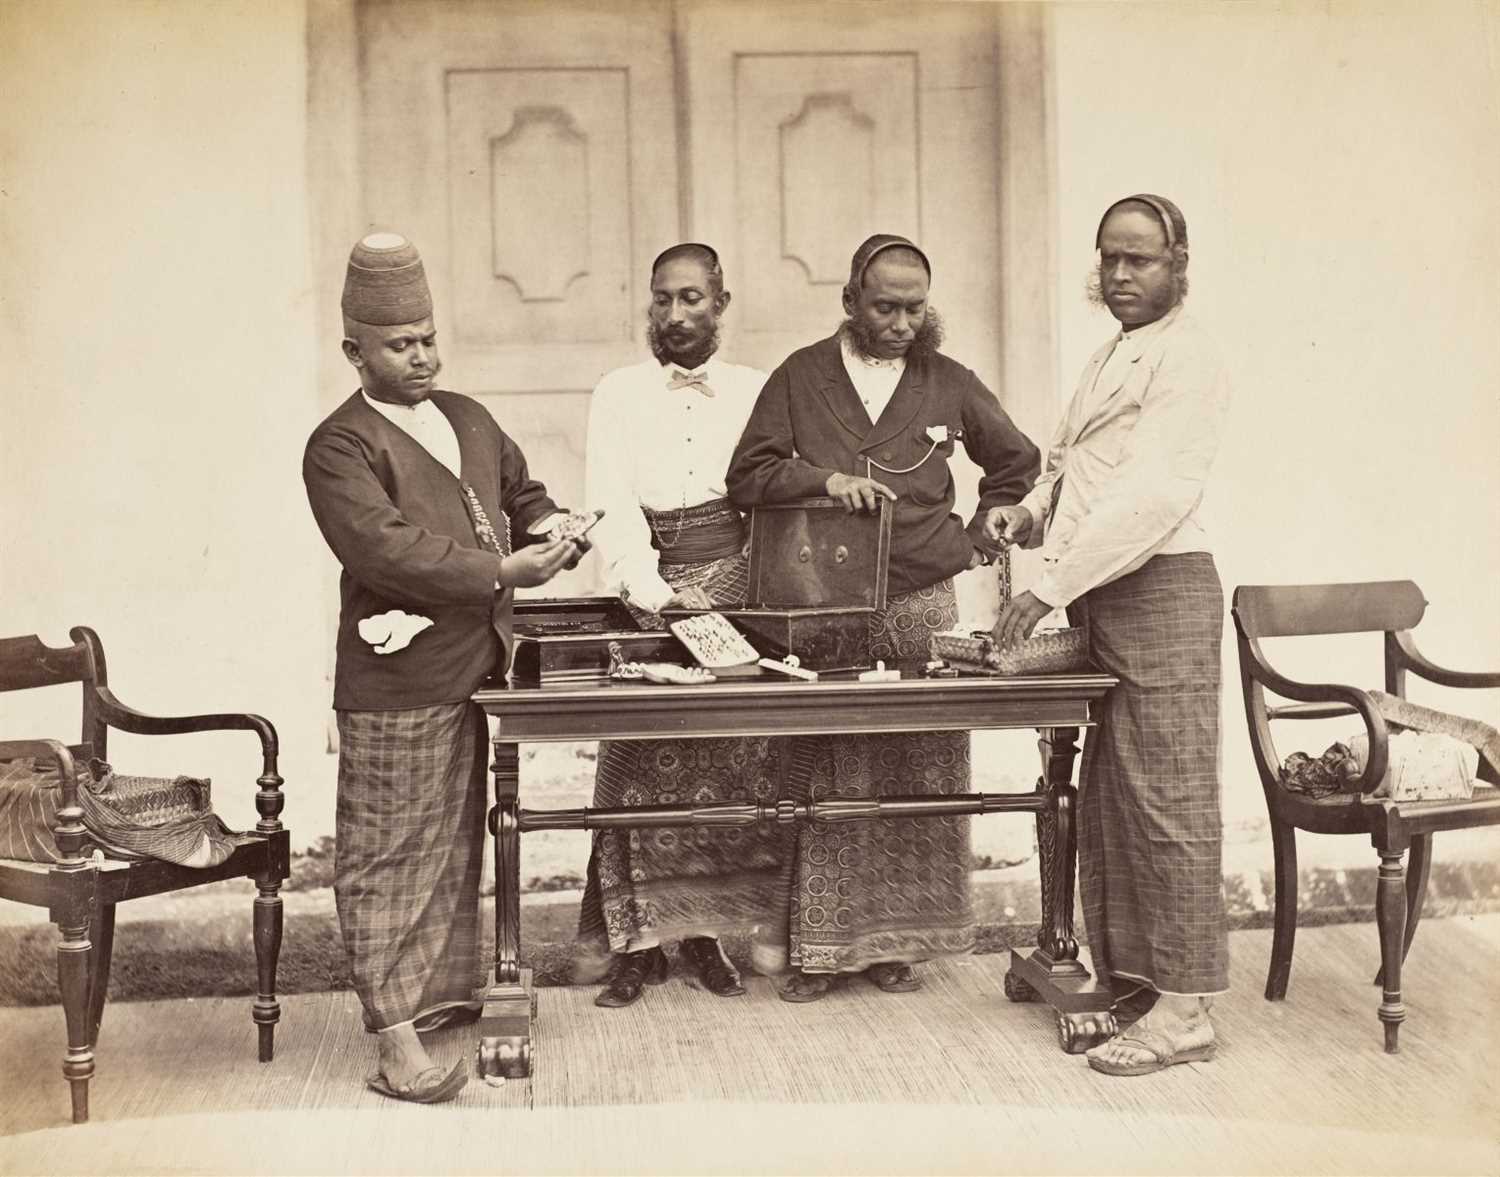 Lot 31 - India. An album containing approximately 56 mounted albumen print views, c. 1870s